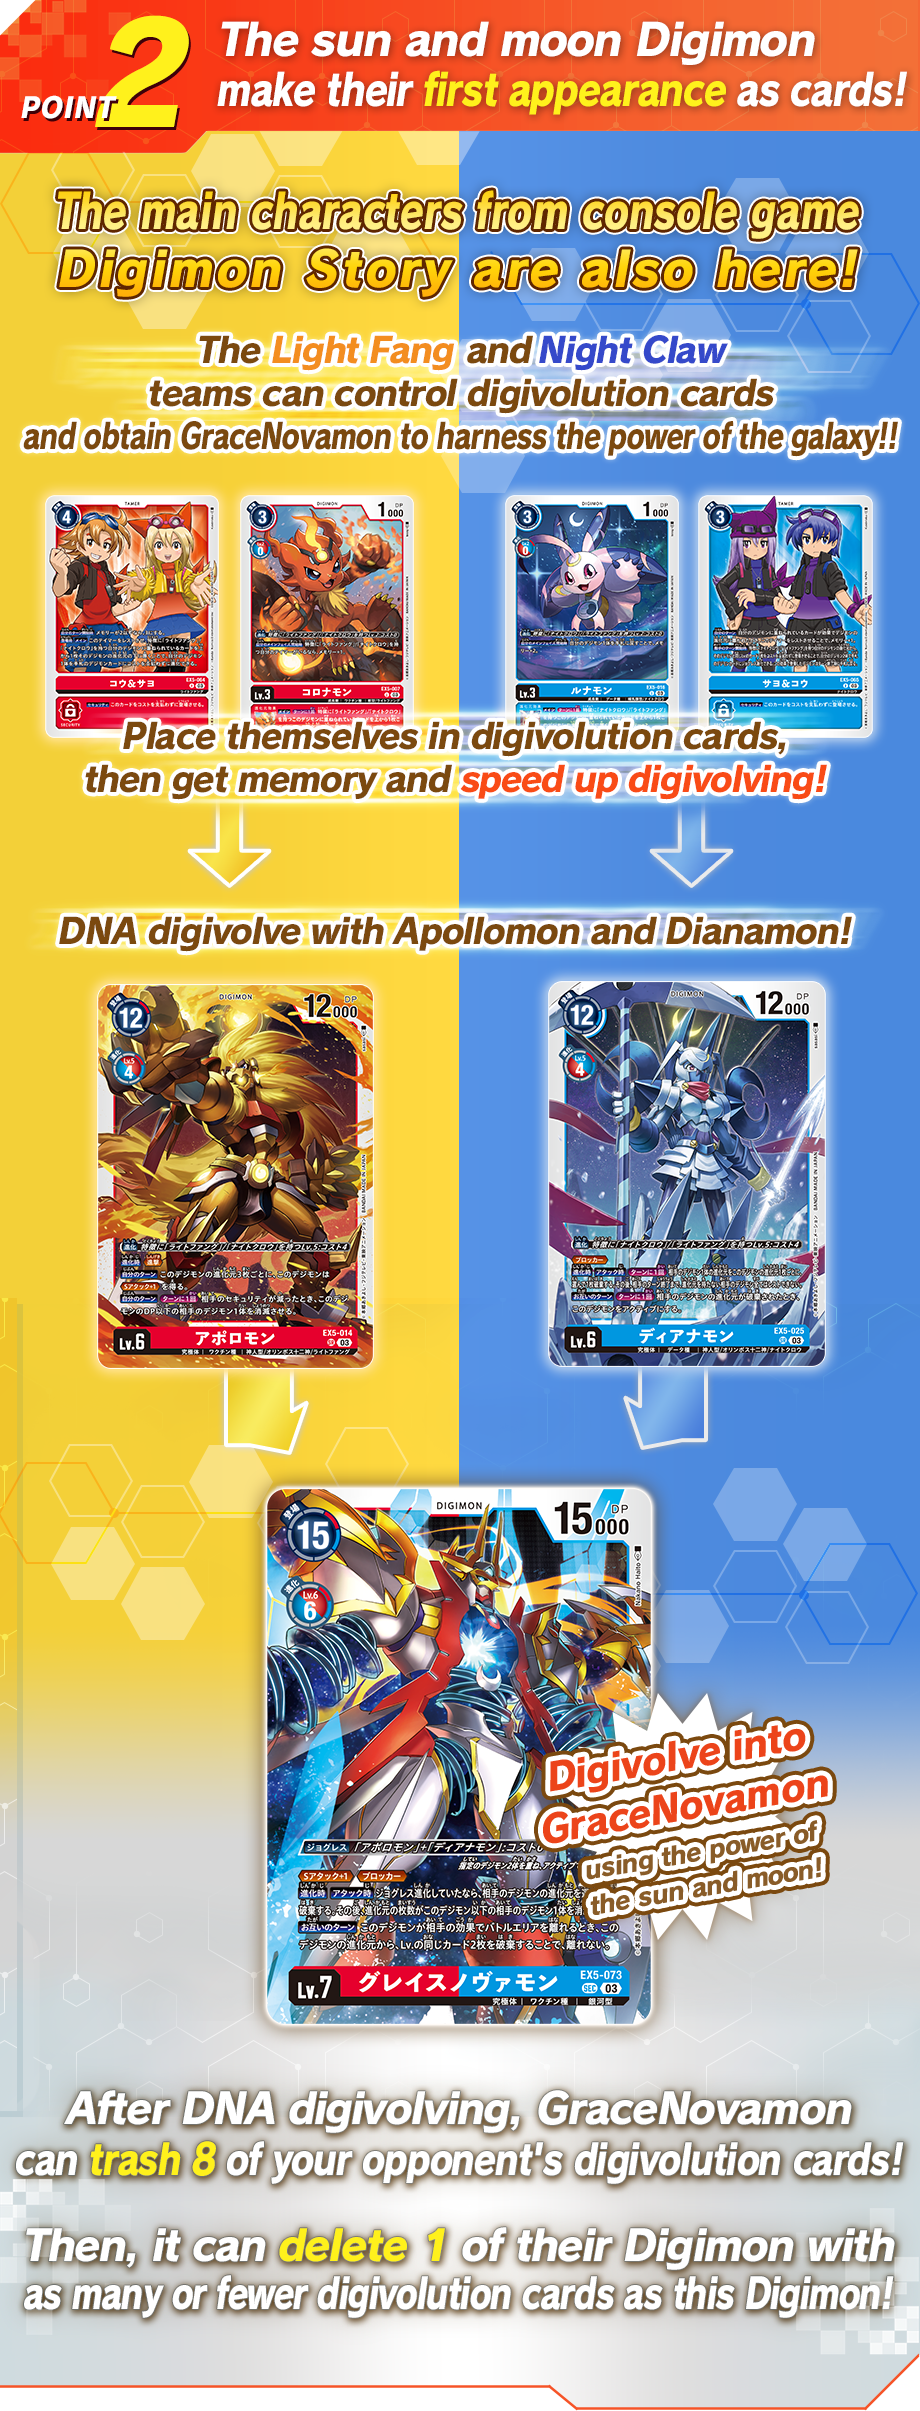 POINT2 The sun and moon Digimon make their first appearance as cards!